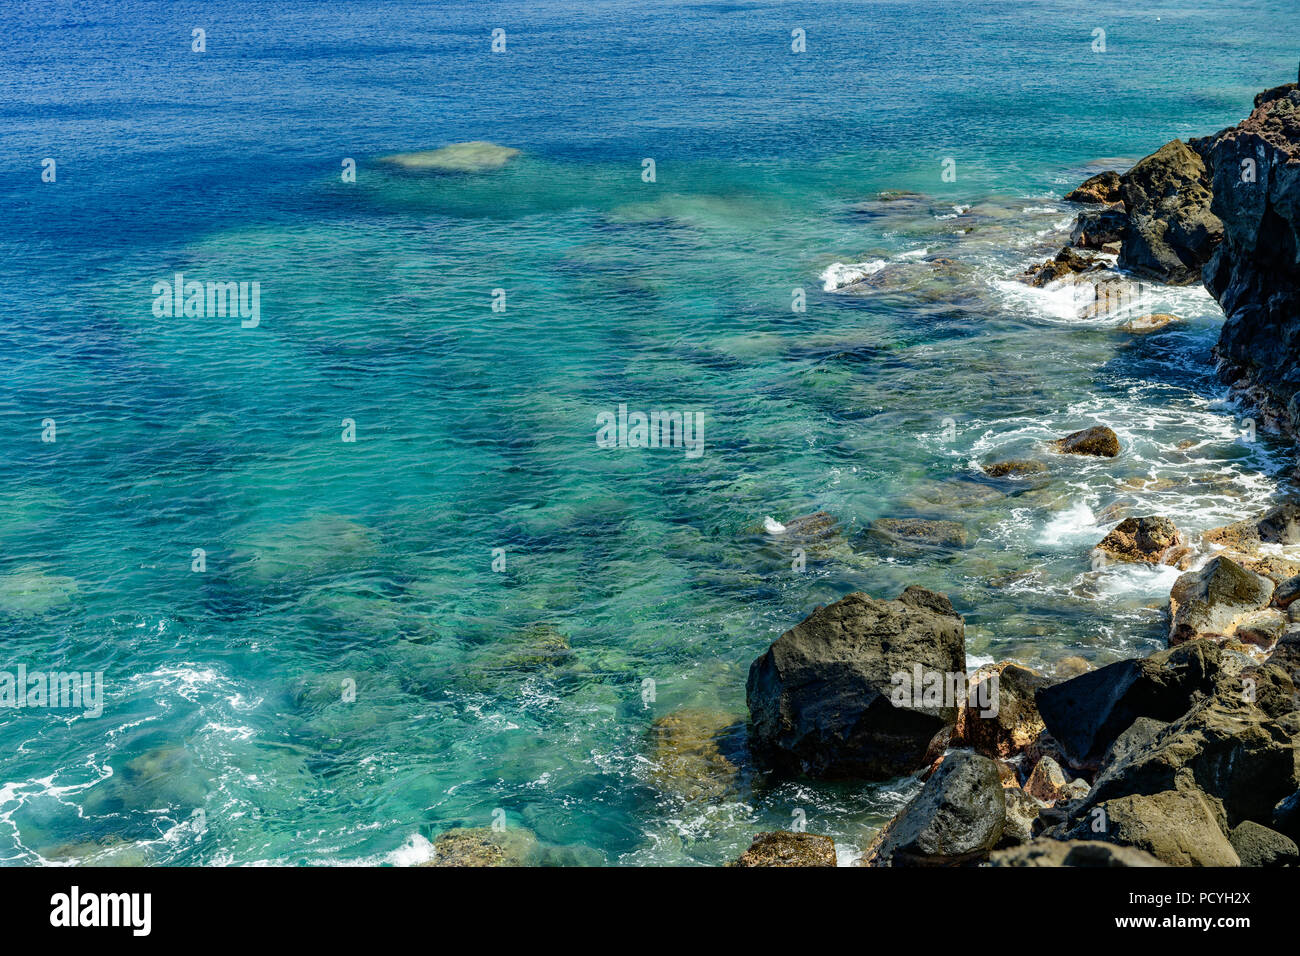 Ka Lae or South Point on the Big Island of Hawaii looking downward at clear water off a rocky cliff. An inviting location for snorkel or scuba. Stock Photo